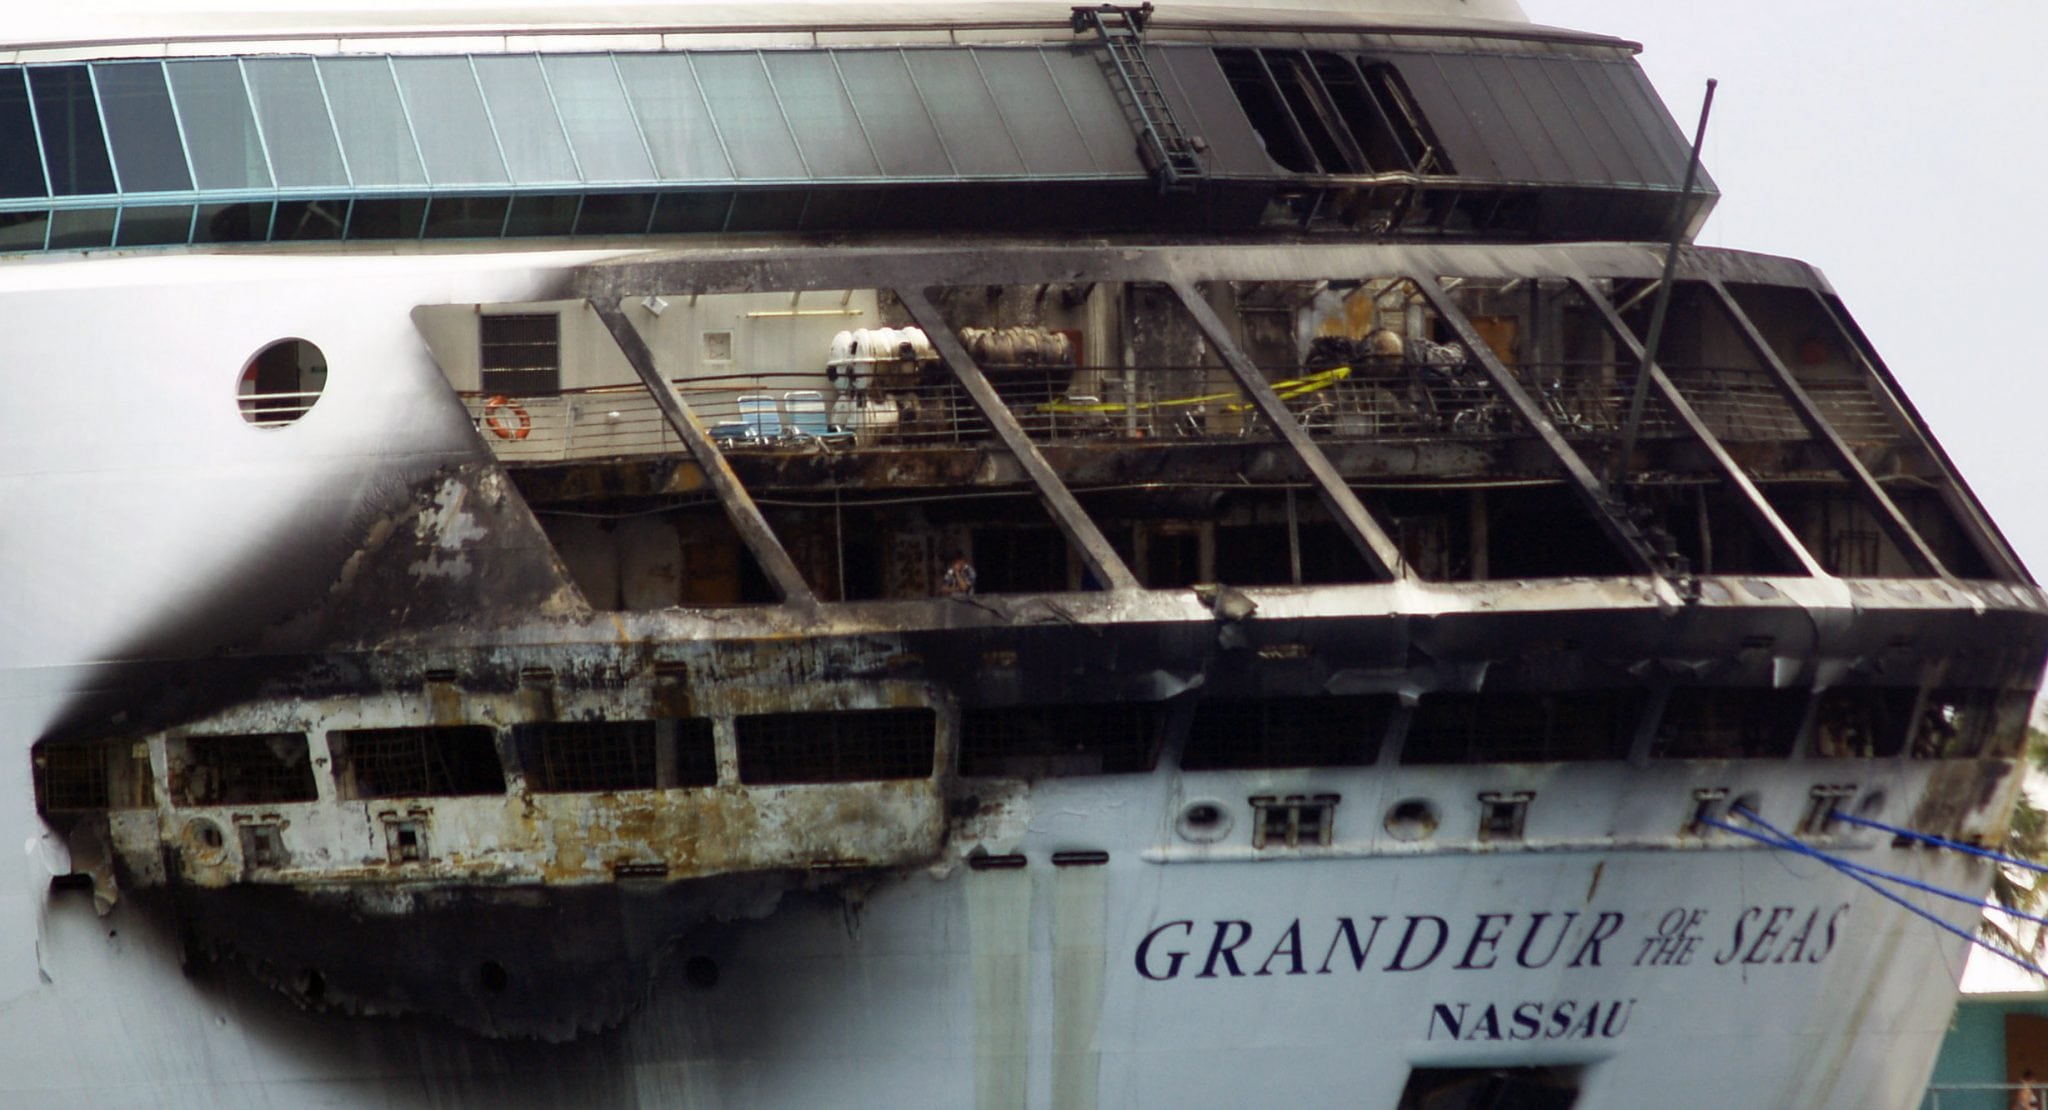 The fire-damaged exterior of Royal Caribbean's Grandeur of the Seas cruise ship is seen while docked in Freeport, Grand Bahama island, Monday, May 27, 2013. 